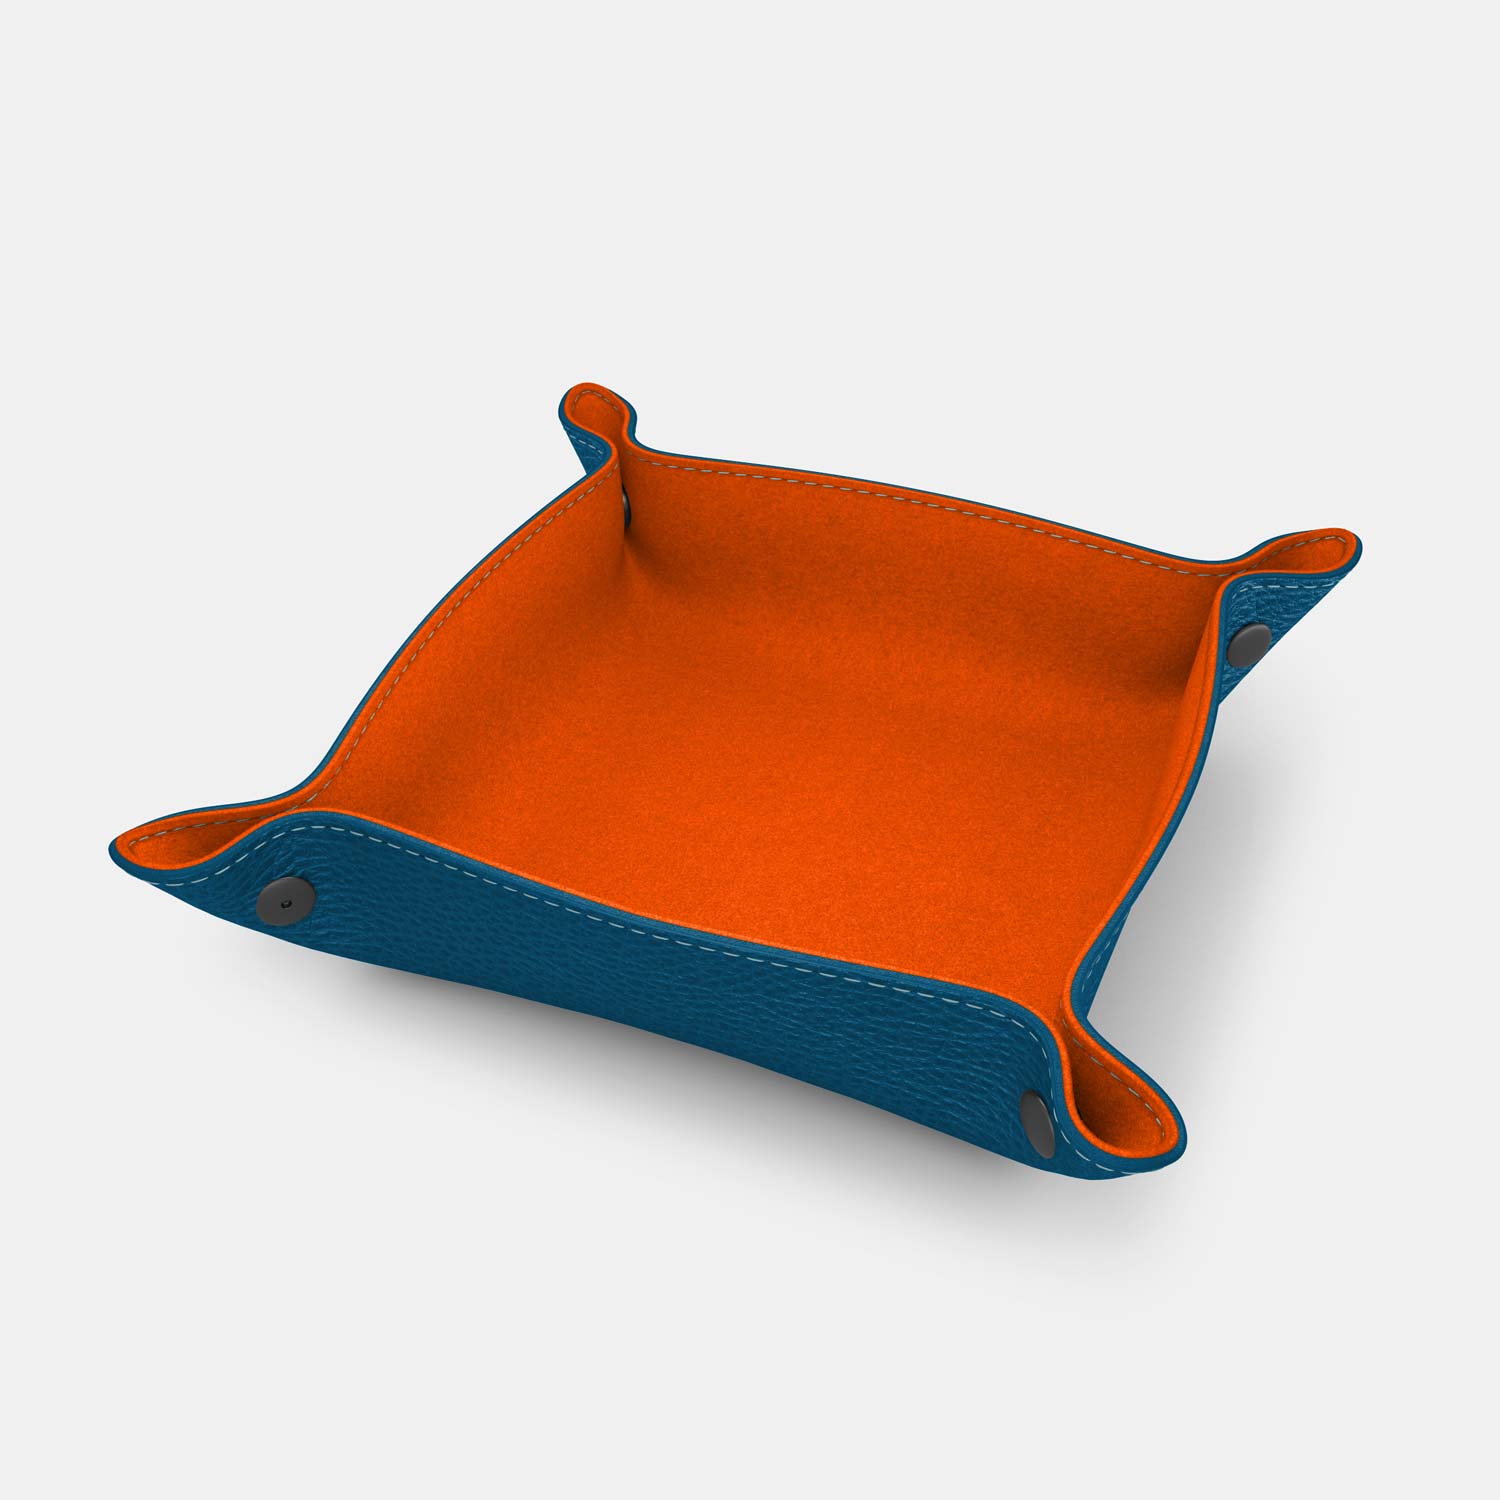 Leather Catch-all Tray - Turquoise Blue and Orange - RYAN London